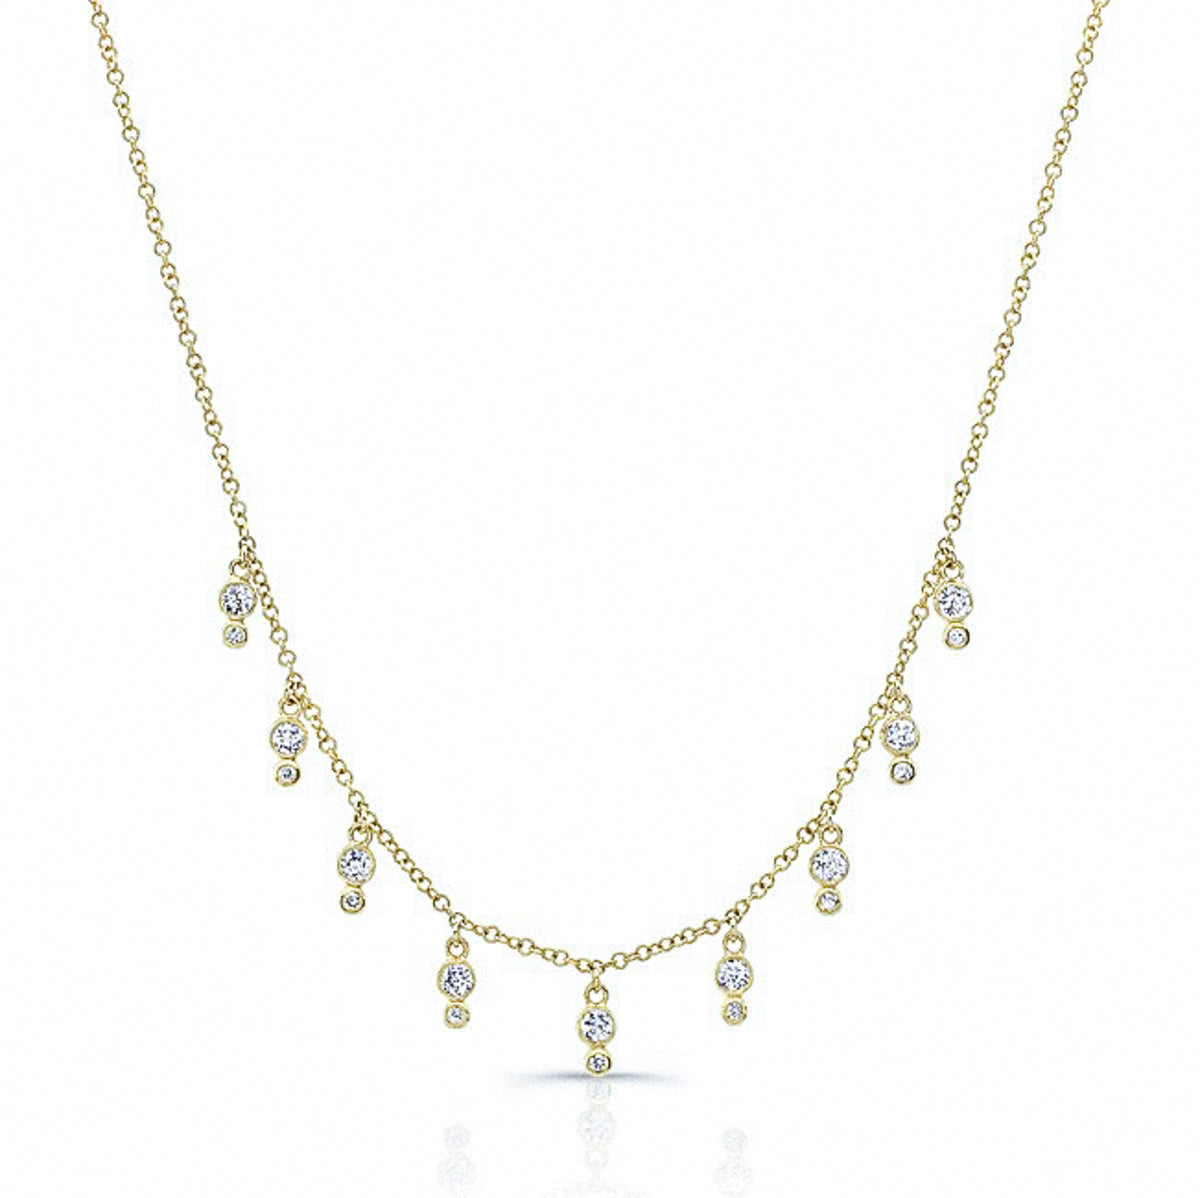 18K WHITE GOLD DIAMONDS BY THE INCH DANGLING 5 STATION NECKLACE - Roberto  Coin - North America